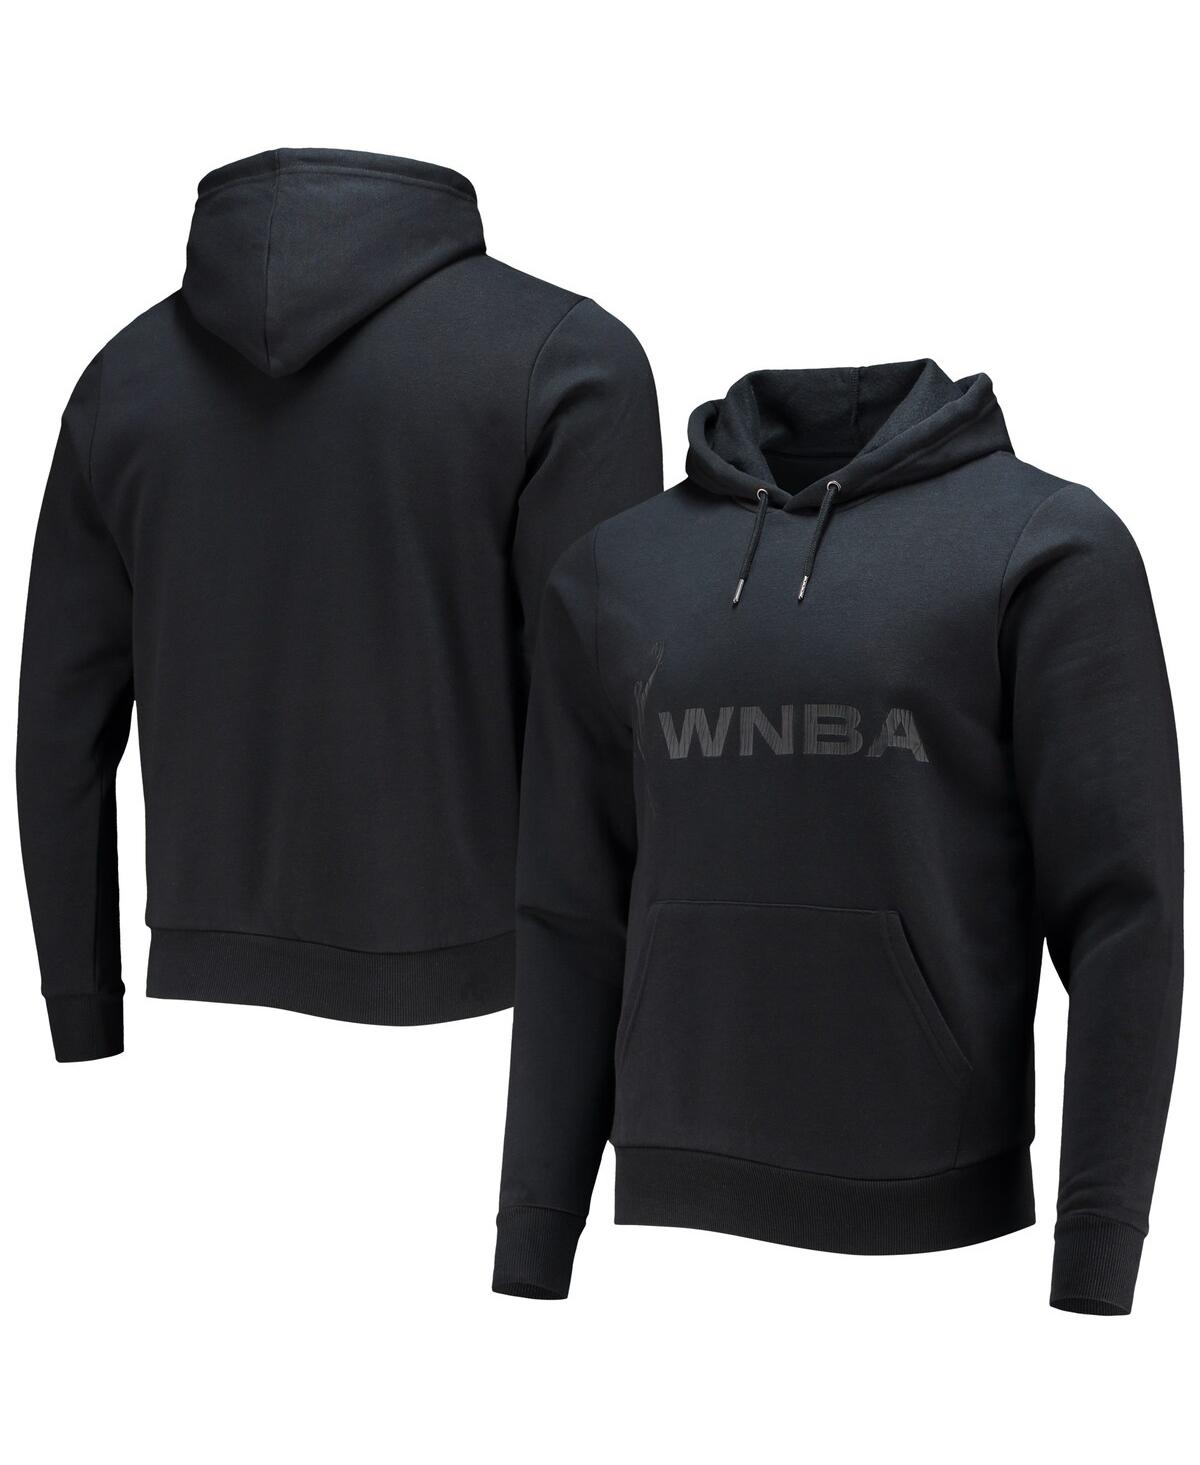 THE WILD COLLECTIVE MEN'S THE WILD COLLECTIVE BLACK WNBA CRACKED PRINT PULLOVER HOODIE